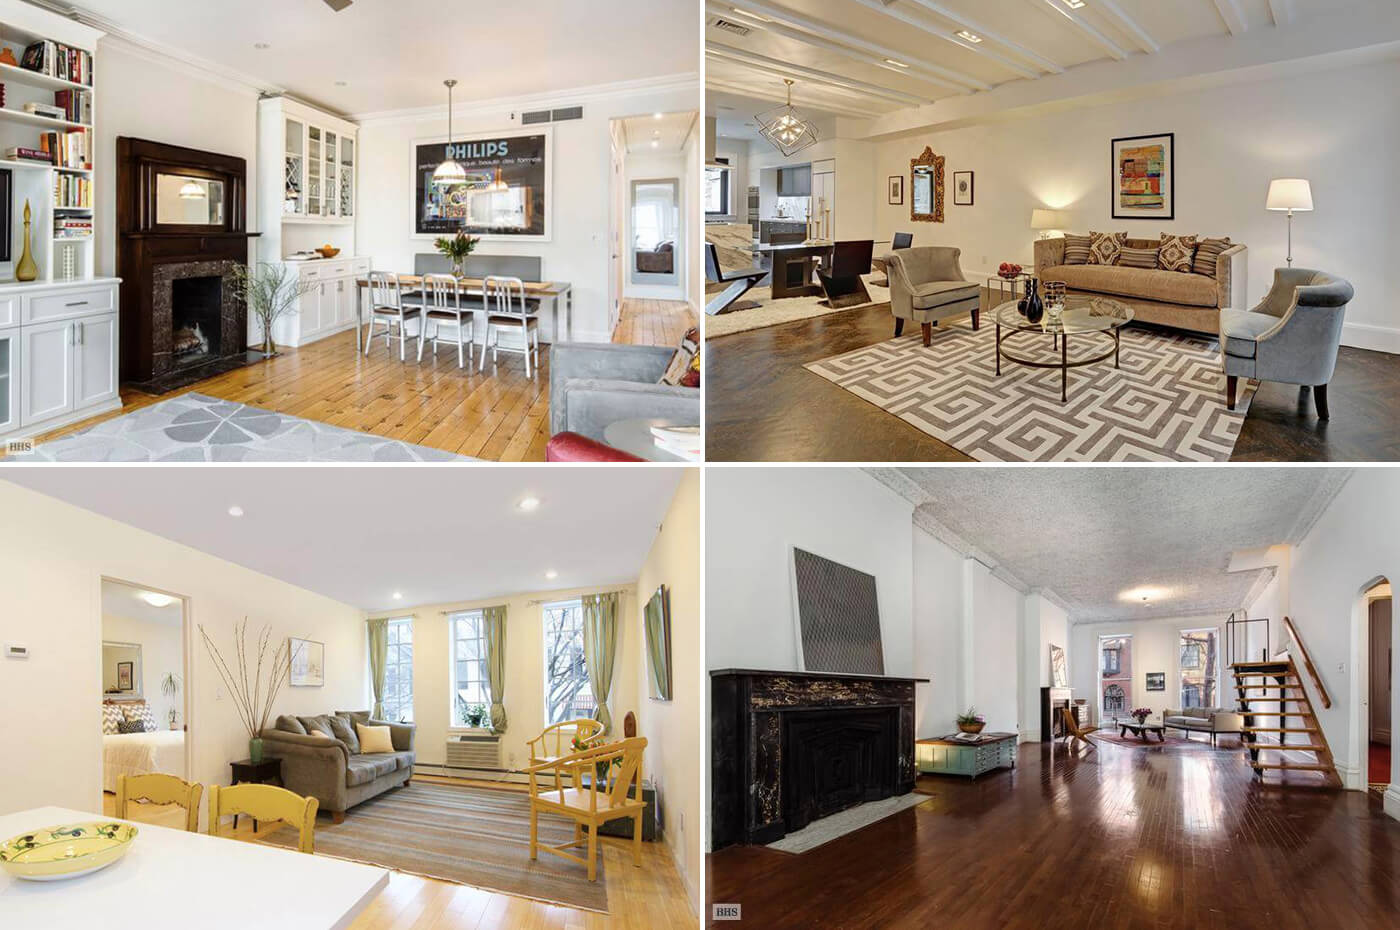 Brooklyn Homes for Sale Crown Heights Prospect Heights Brooklyn Heights Greenwood Heights